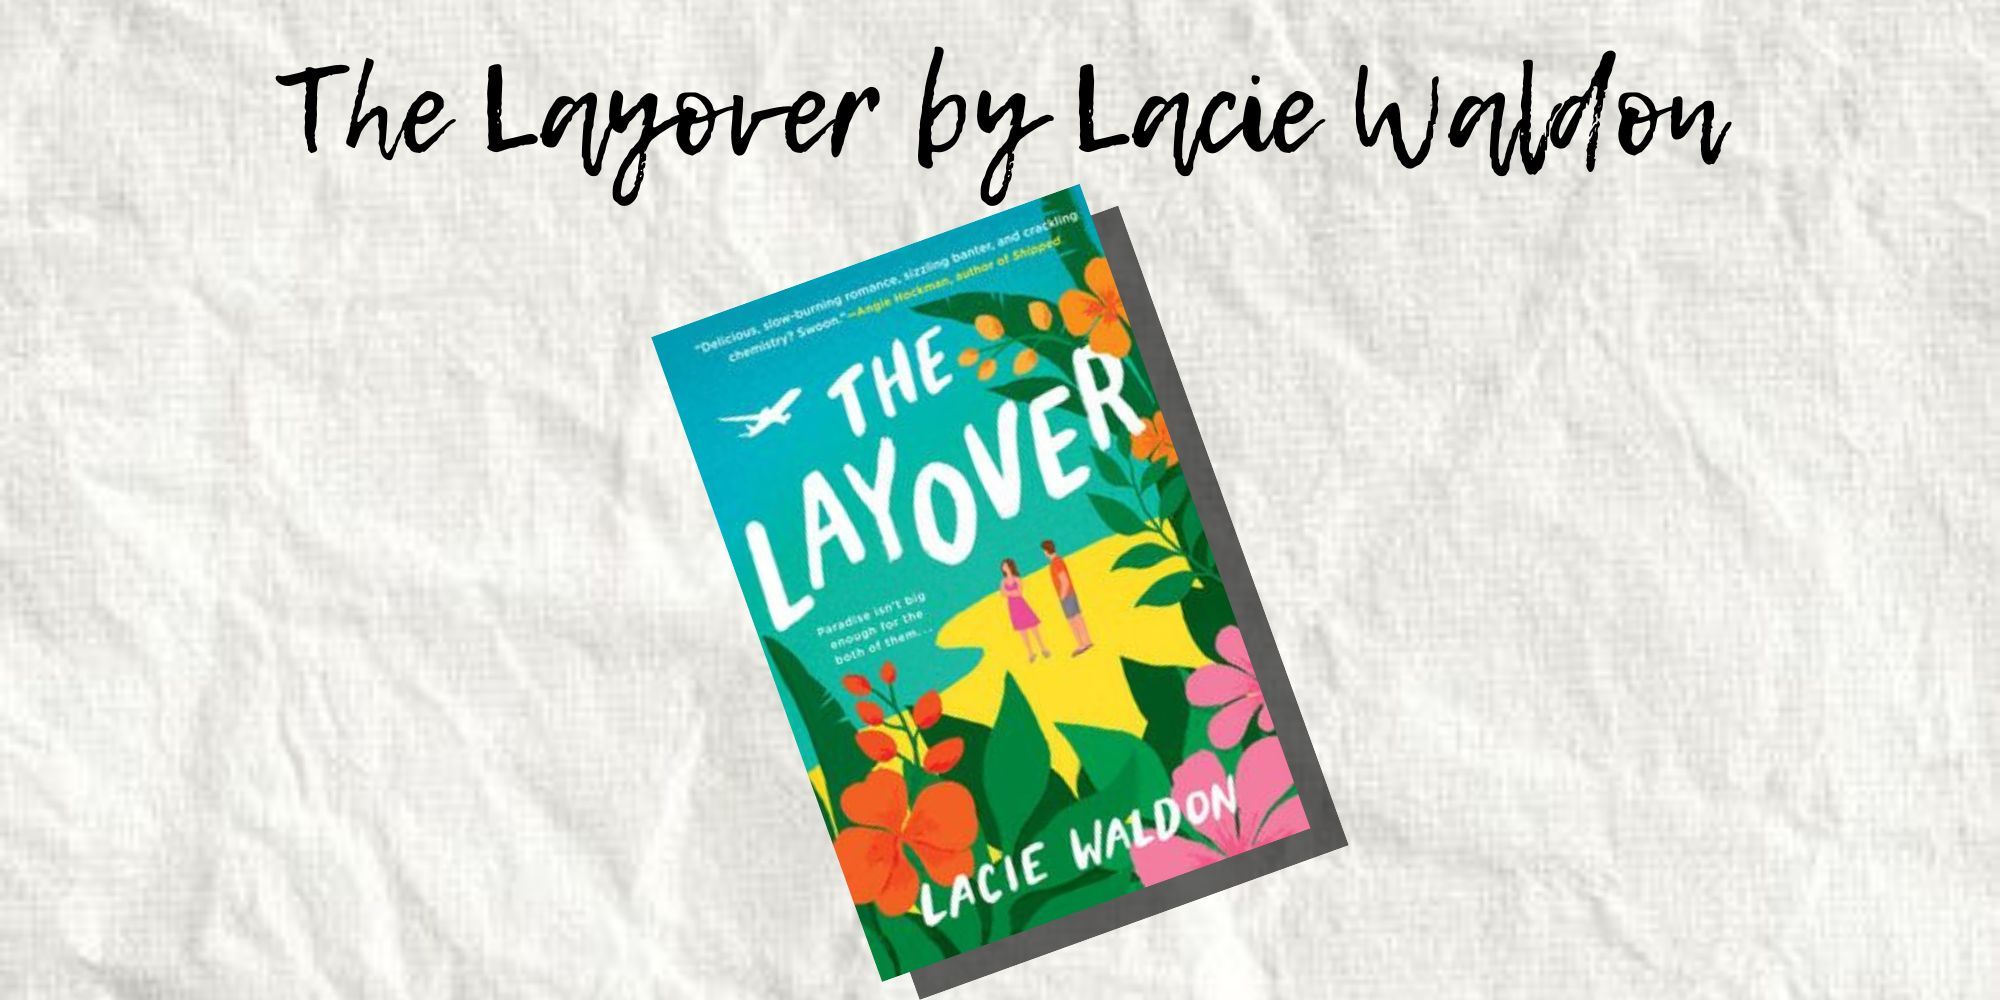 The Cover of The Layover by Lacie Waldon